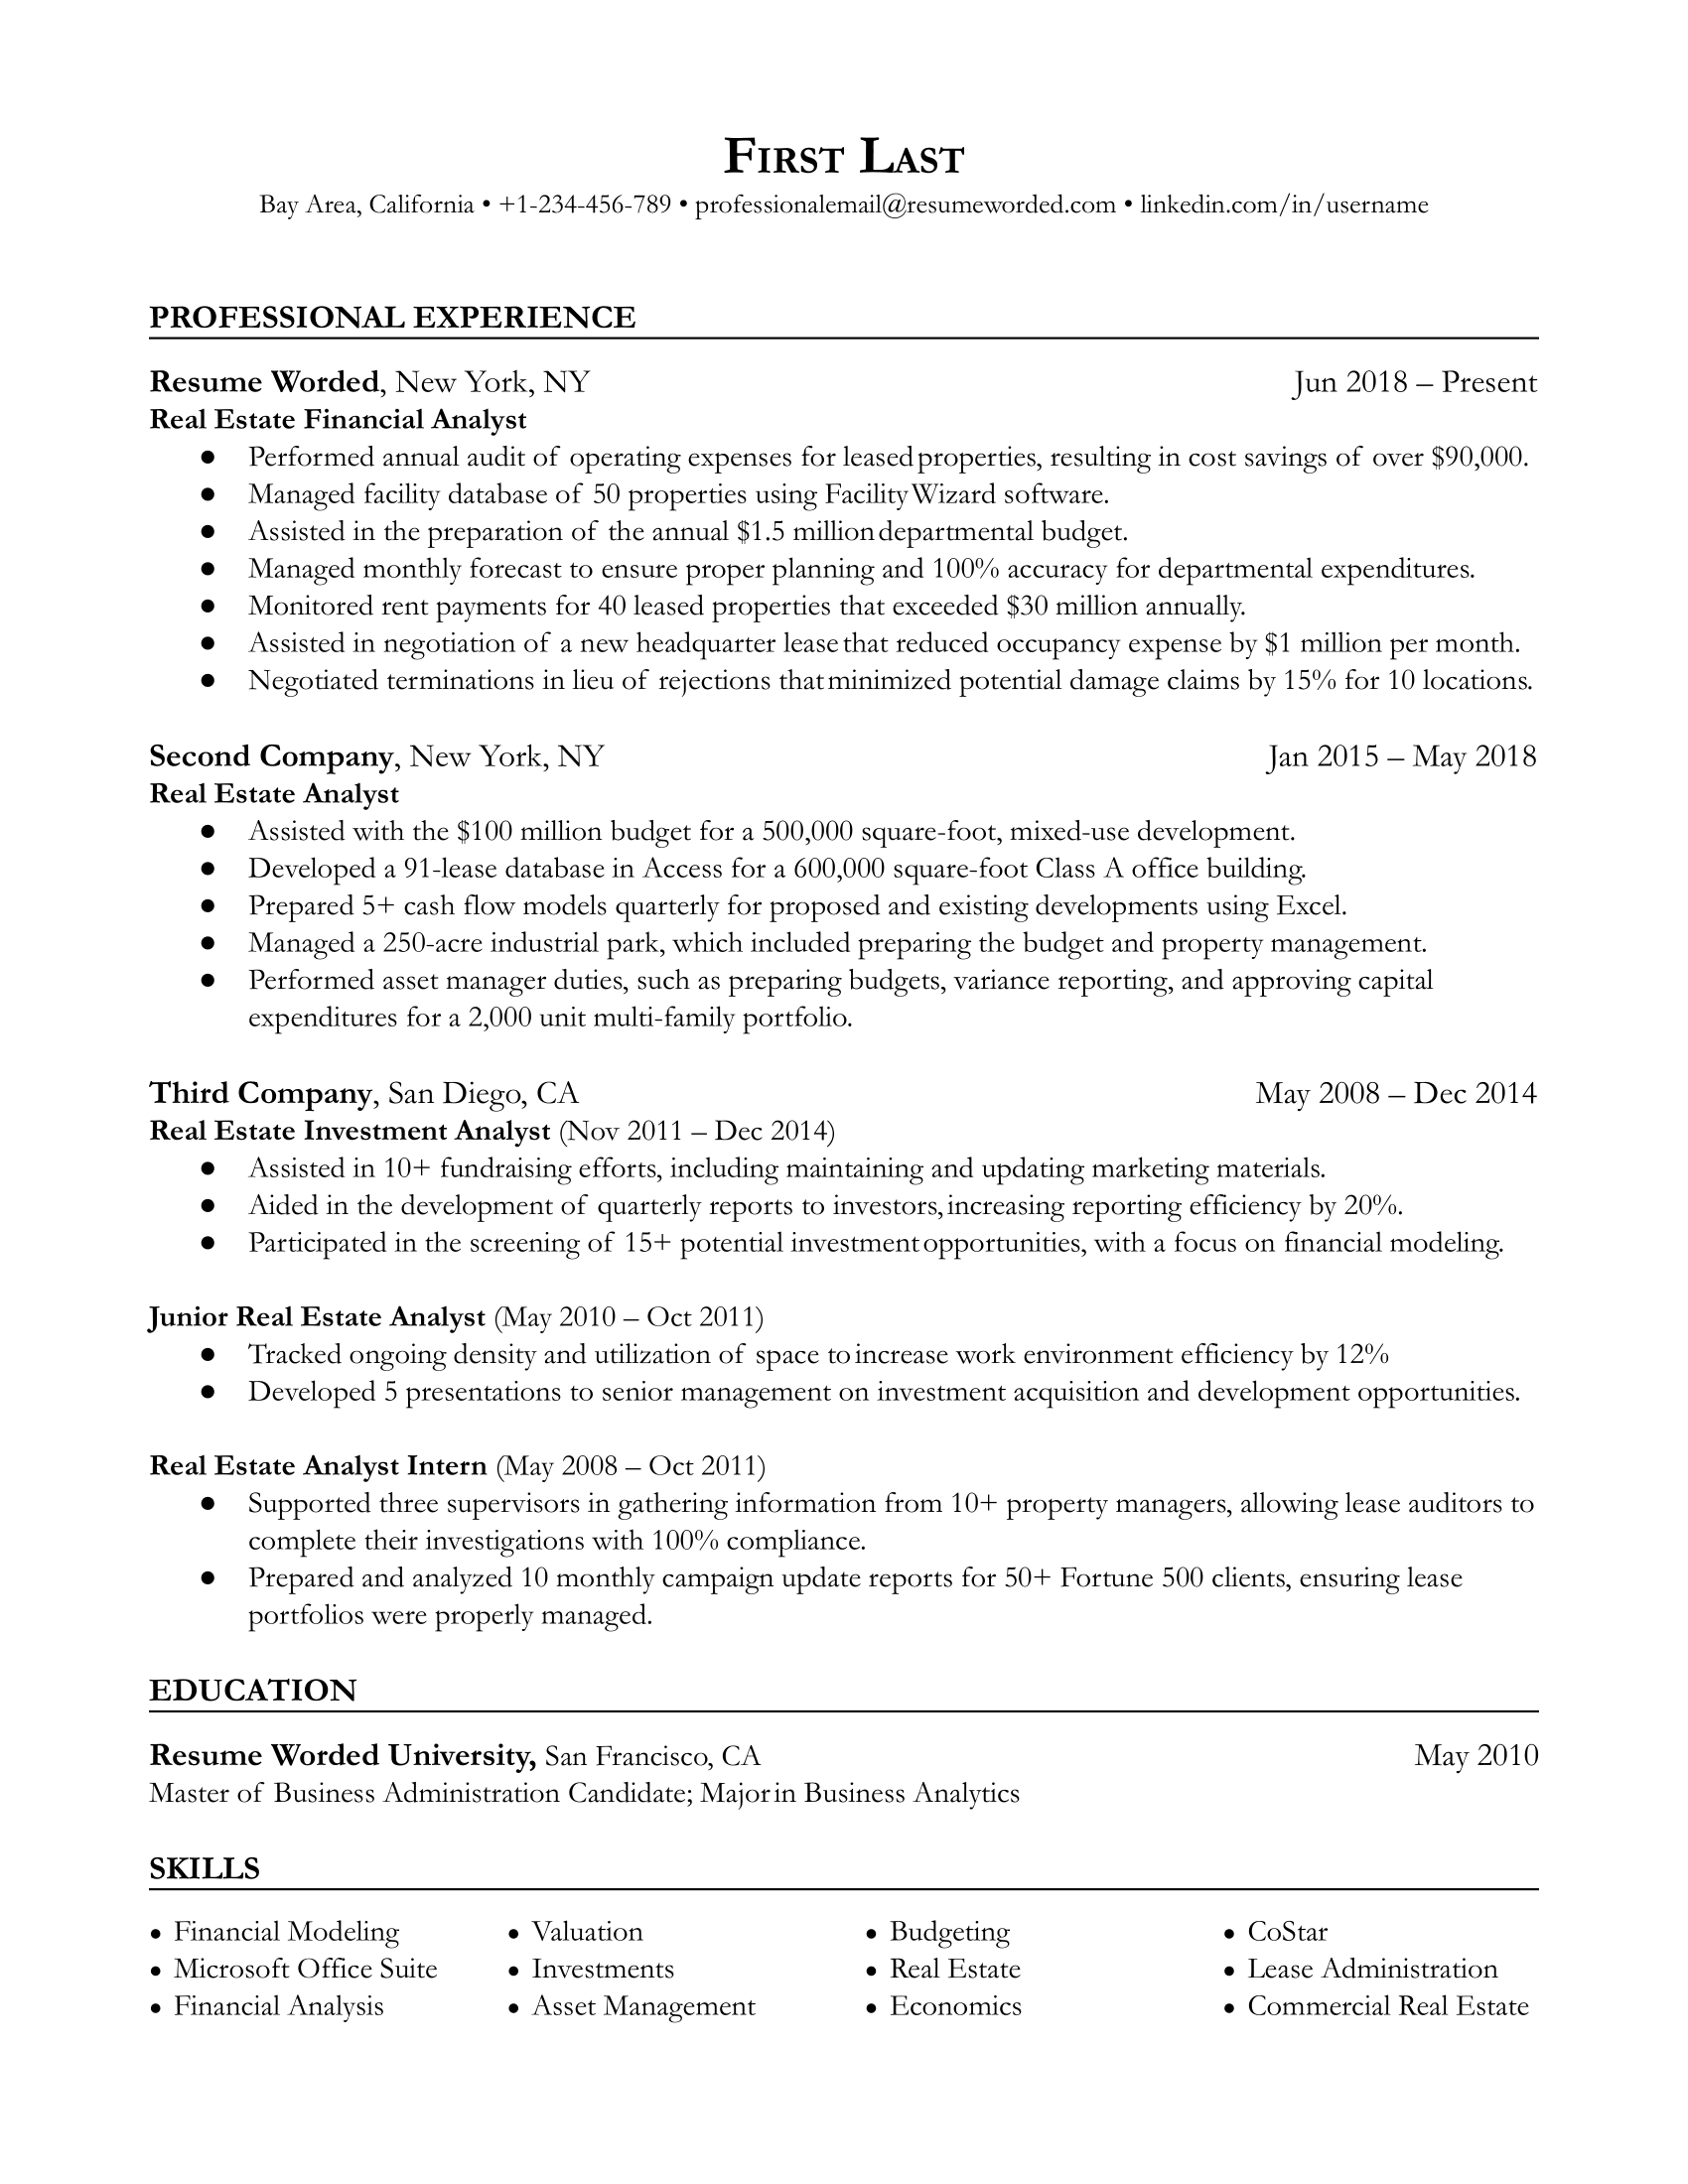 Real estate financial analyst resume with promotions and relevant work experience